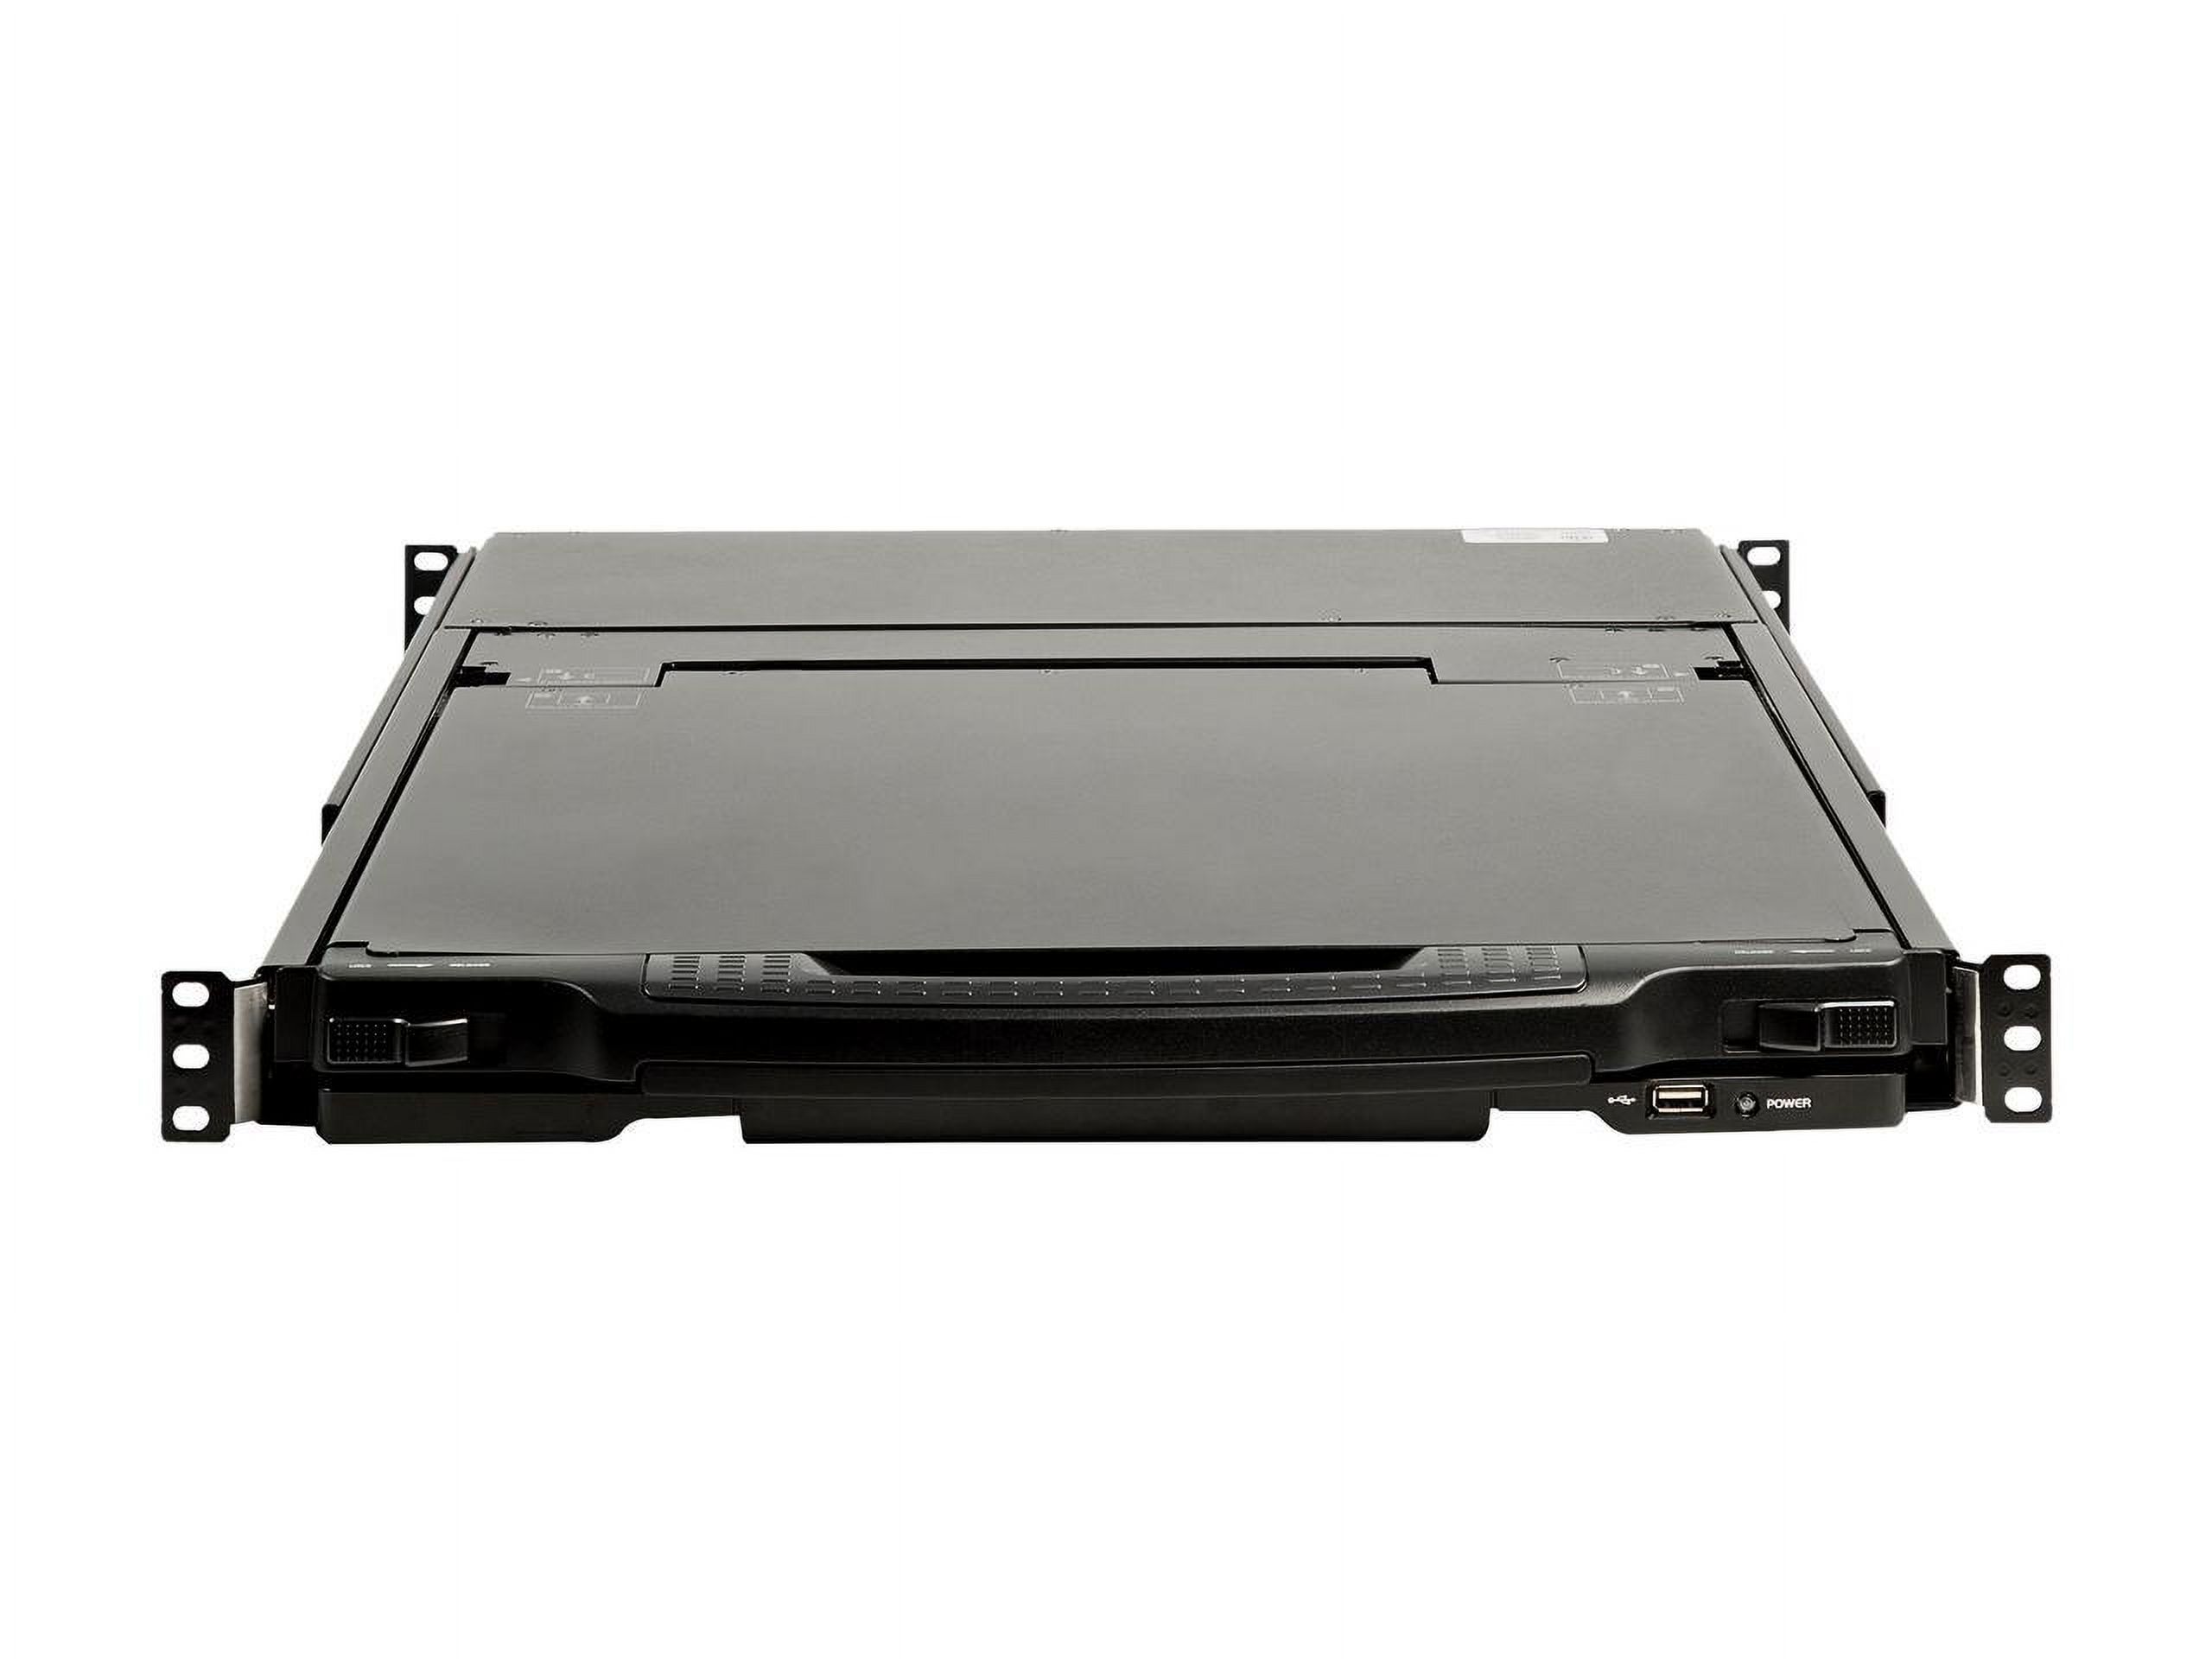 StarTech.com RKCOND17HD 17" HD Rackmount KVM Console - Dual Rail - Cables and Mounting Brackets Included - DVI and VGA - Rackmount LCD Monitor - image 4 of 5